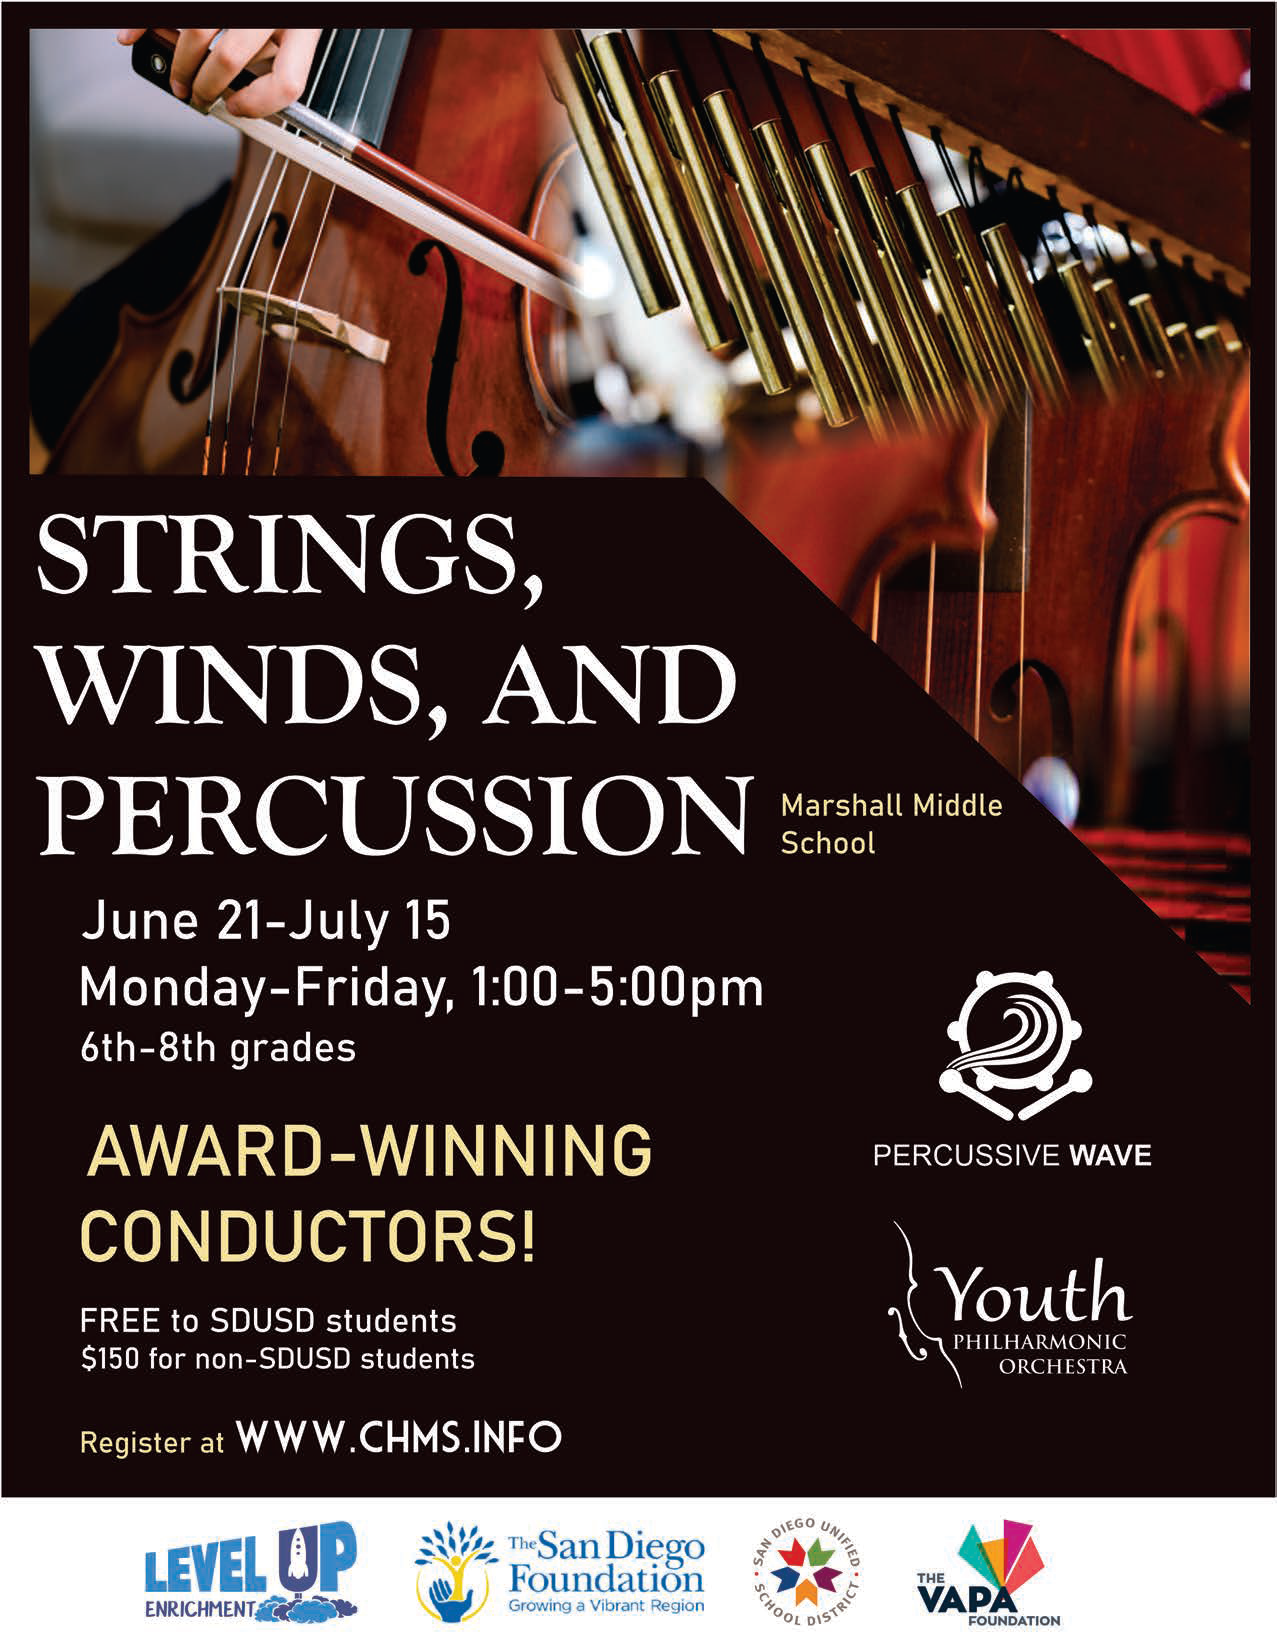 Strings, Winds, and Percussion